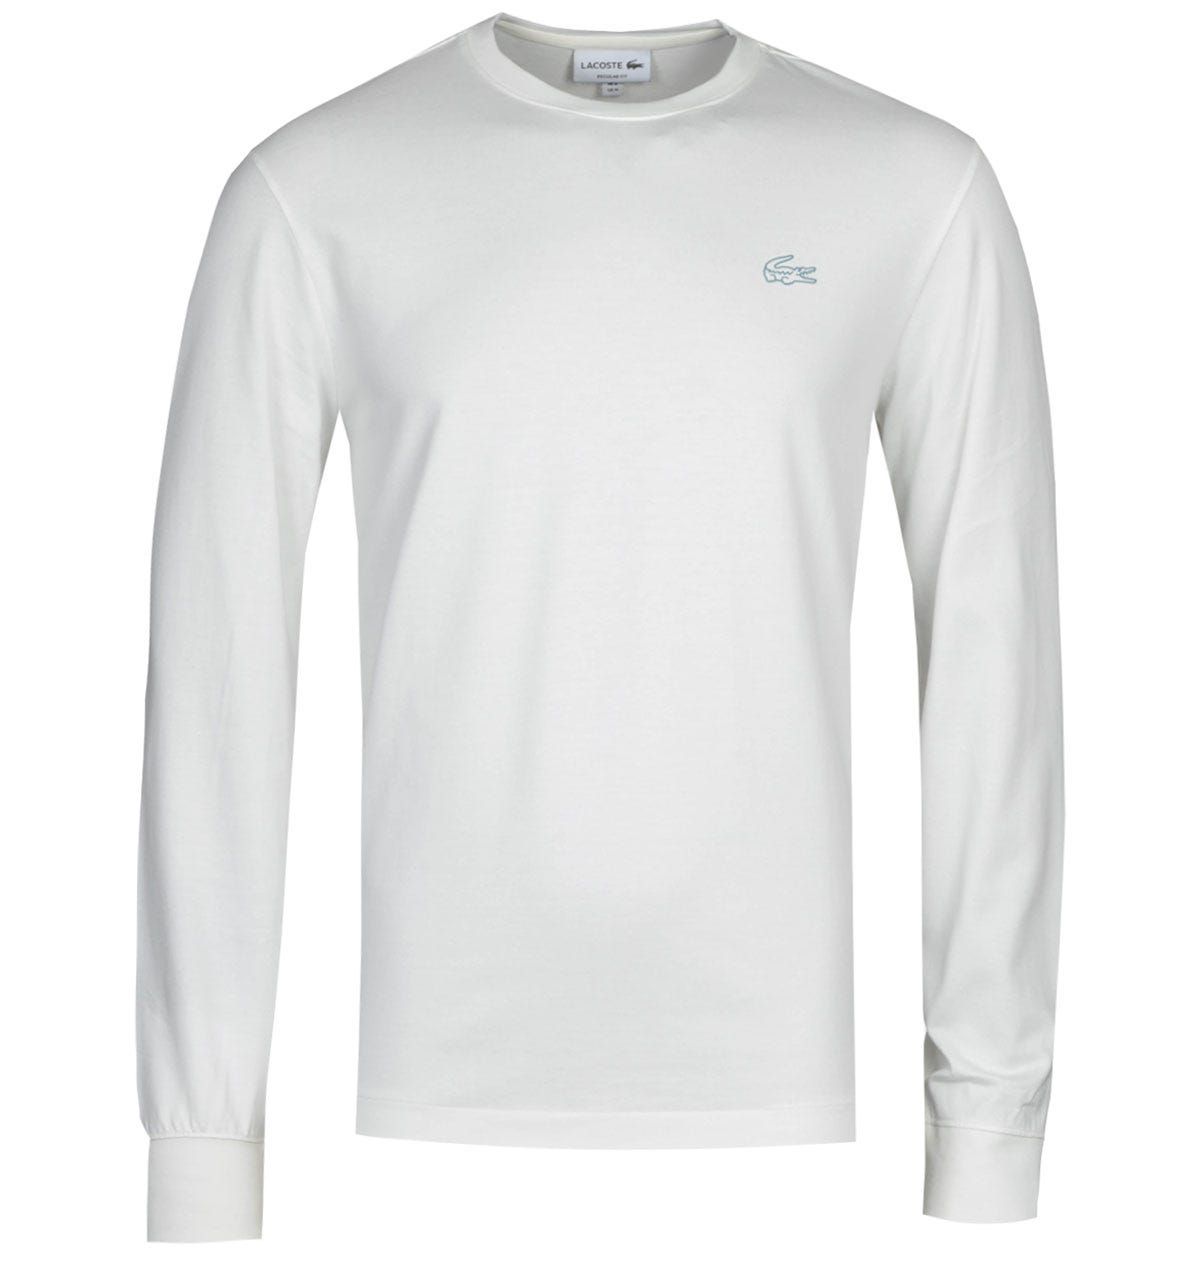 <p>A pure cotton composition, crafted by Lacoste. The Lacoste Homme White Long Sleeve T-Shirt is a lightweight garment, fitted with a crew neck and ribbed trims. This iconic design is finished with the Lacoste logo embroidered at the chest.</p><ul><li>Cotton composition</li><li>Crew neck</li><li>Long sleeve</li><li>Ribbed trims</li><li>Lacoste logo embroidered on chest</li></ul><p>Style & Fit:</p><ul><li>Regular fit</li><li>Fits true to size</li></ul><p>Fabric Composition & Care:</p><ul><li>100% Cotton</li><li>Machine washable</li></ul>